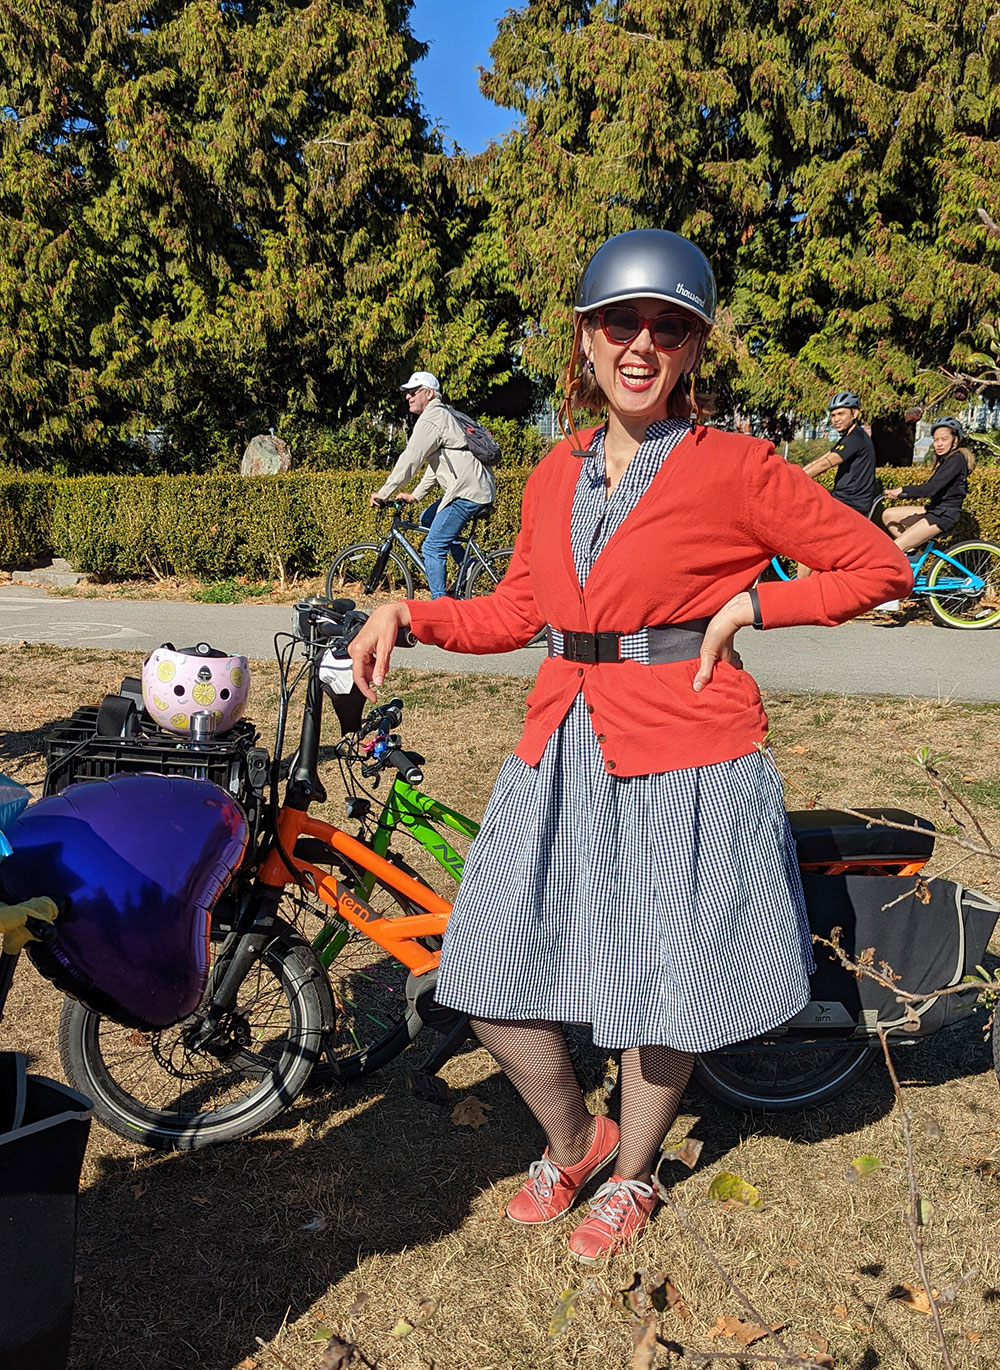 Lisa Corriveau is standing next to her bike with a hand on her hip, smiling. She is wearing sunglasses, a navy bike helmet, and an orange cardigan over a striped navy and white dress. Behind her are cyclists riding on a protected bike lane.